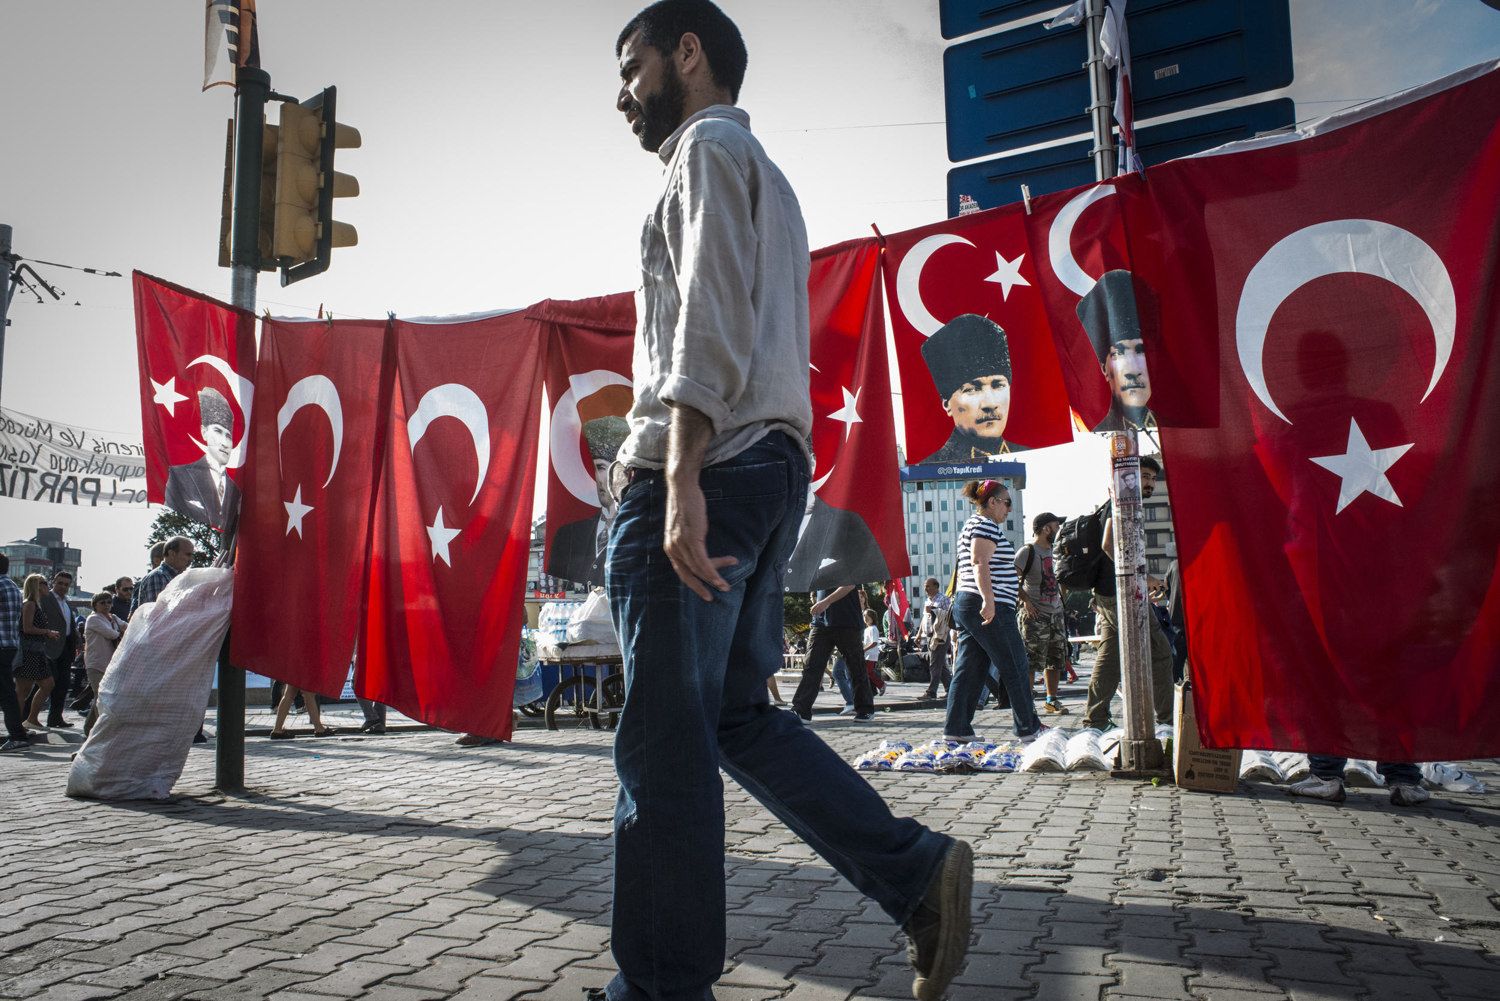  A man walks buy flags picturing the face of Ataturk, the founder of Modern Day Turkey on June 6, 2013. 